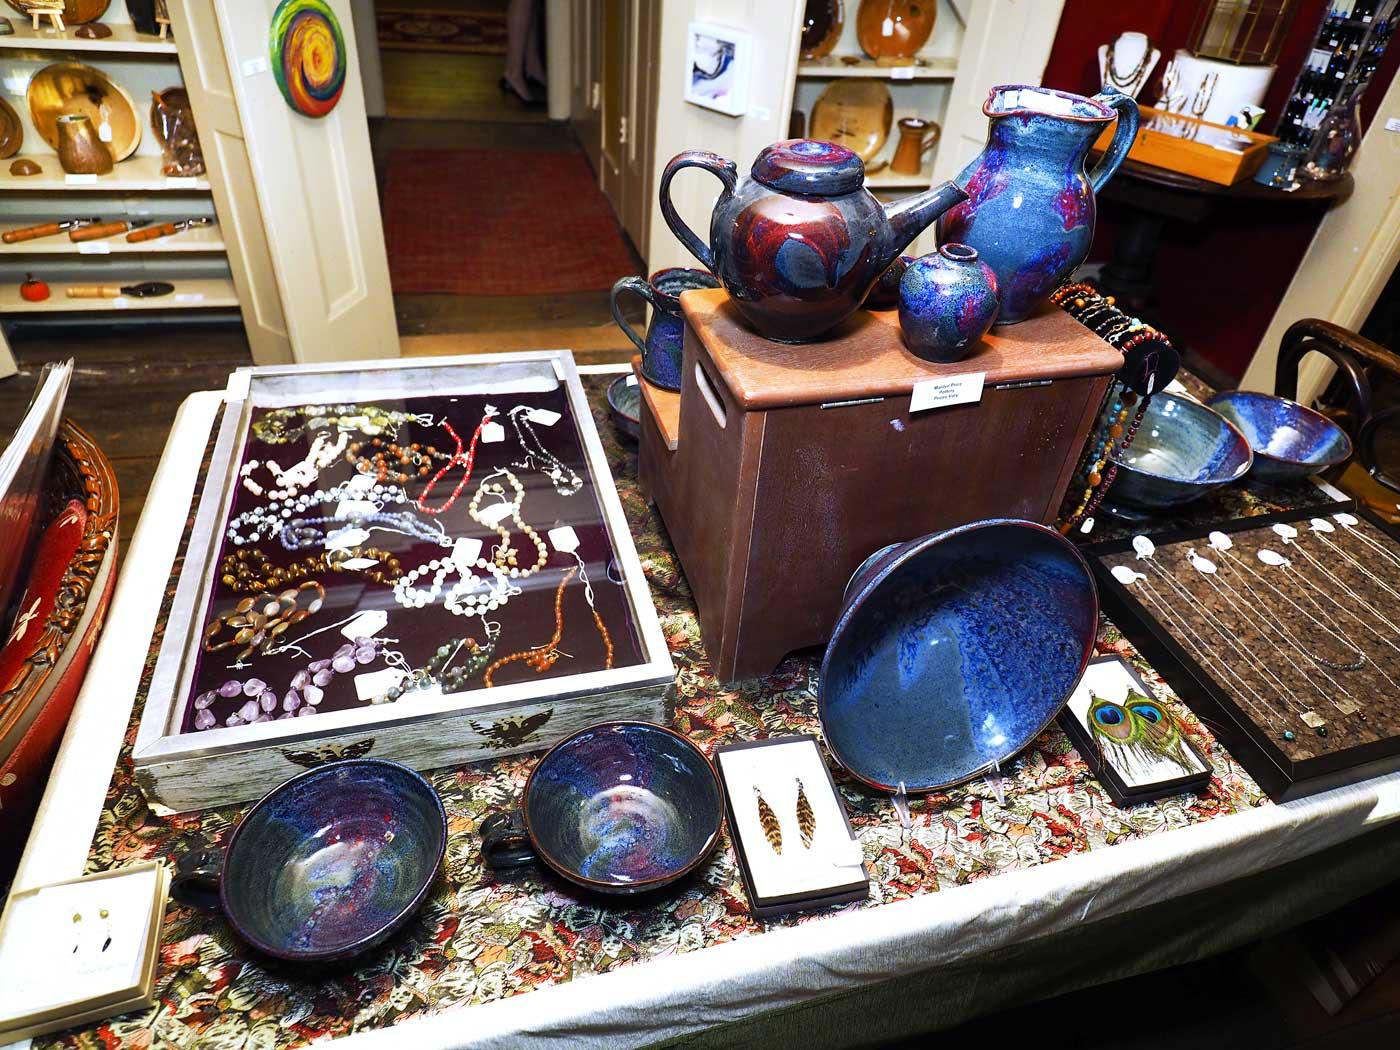 34th Annual Columbus Day Weekend Arts and Fine Crafts Show Continued!